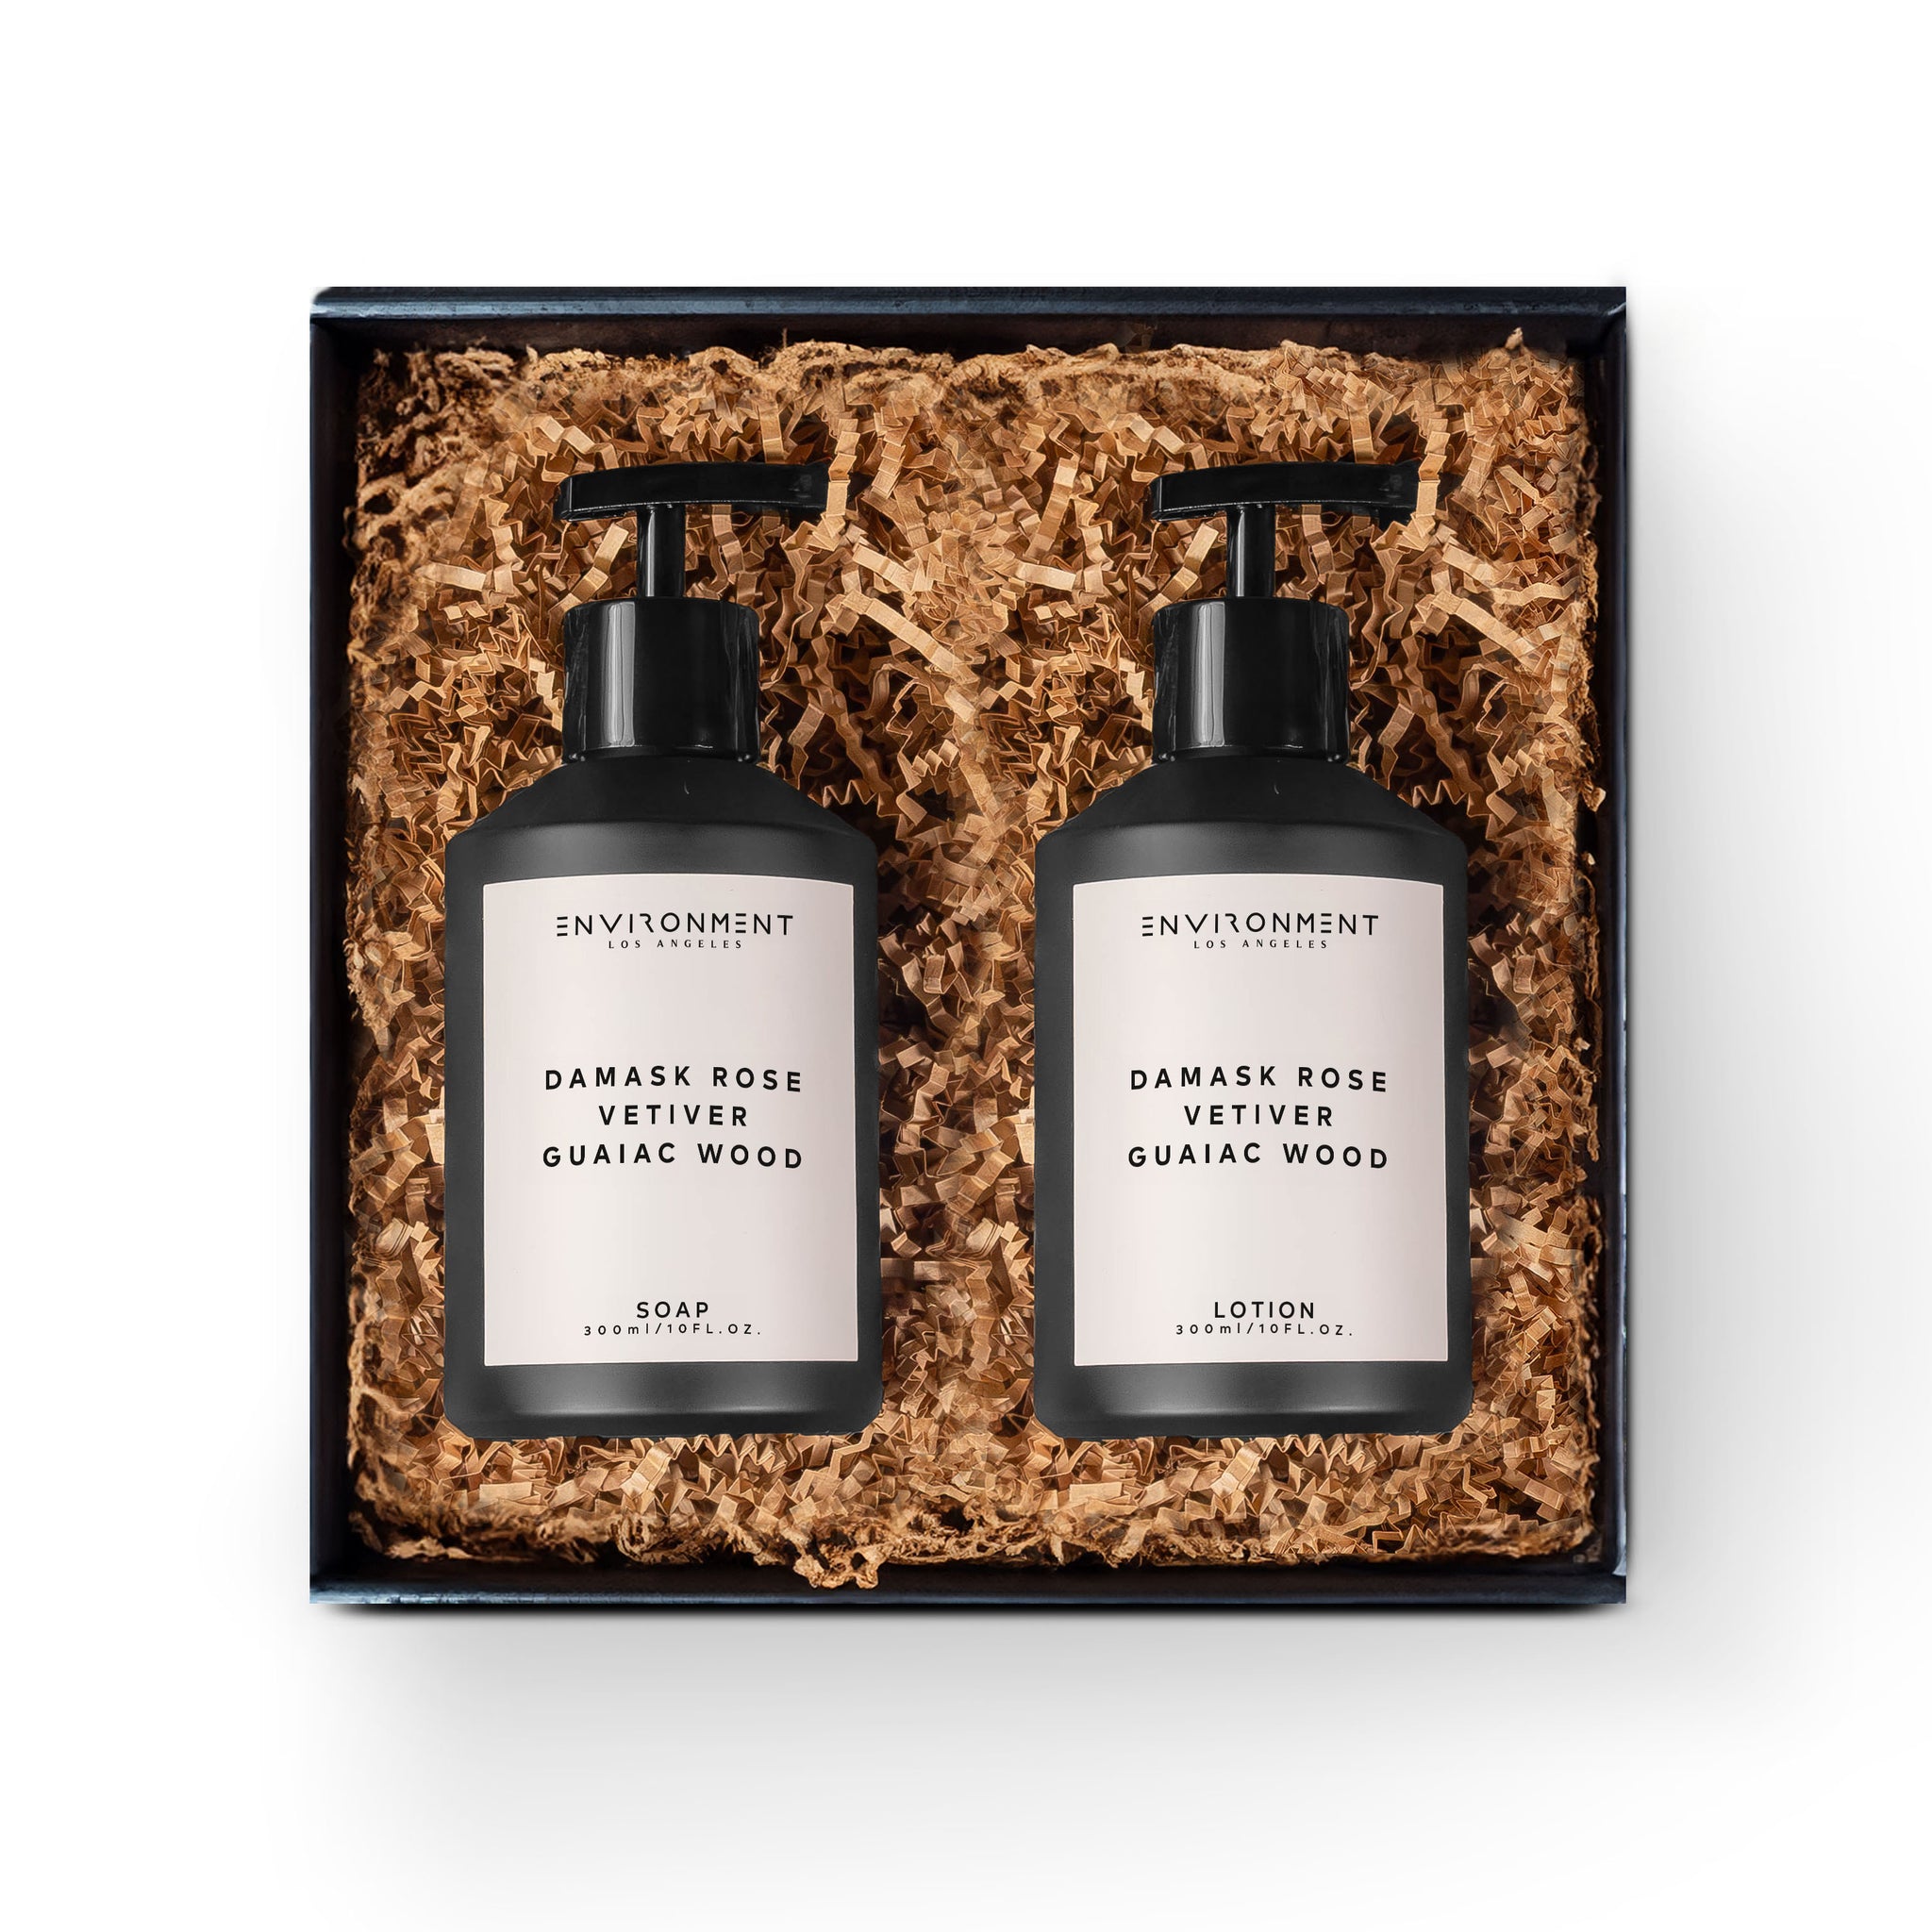 Damask Rose | Vetiver | Guaiac Wood 300ml Hand Soap and 300ml Lotion Gift Pack (Inspired by The Le Labo Rose 31® and Fairmont Hotel®)